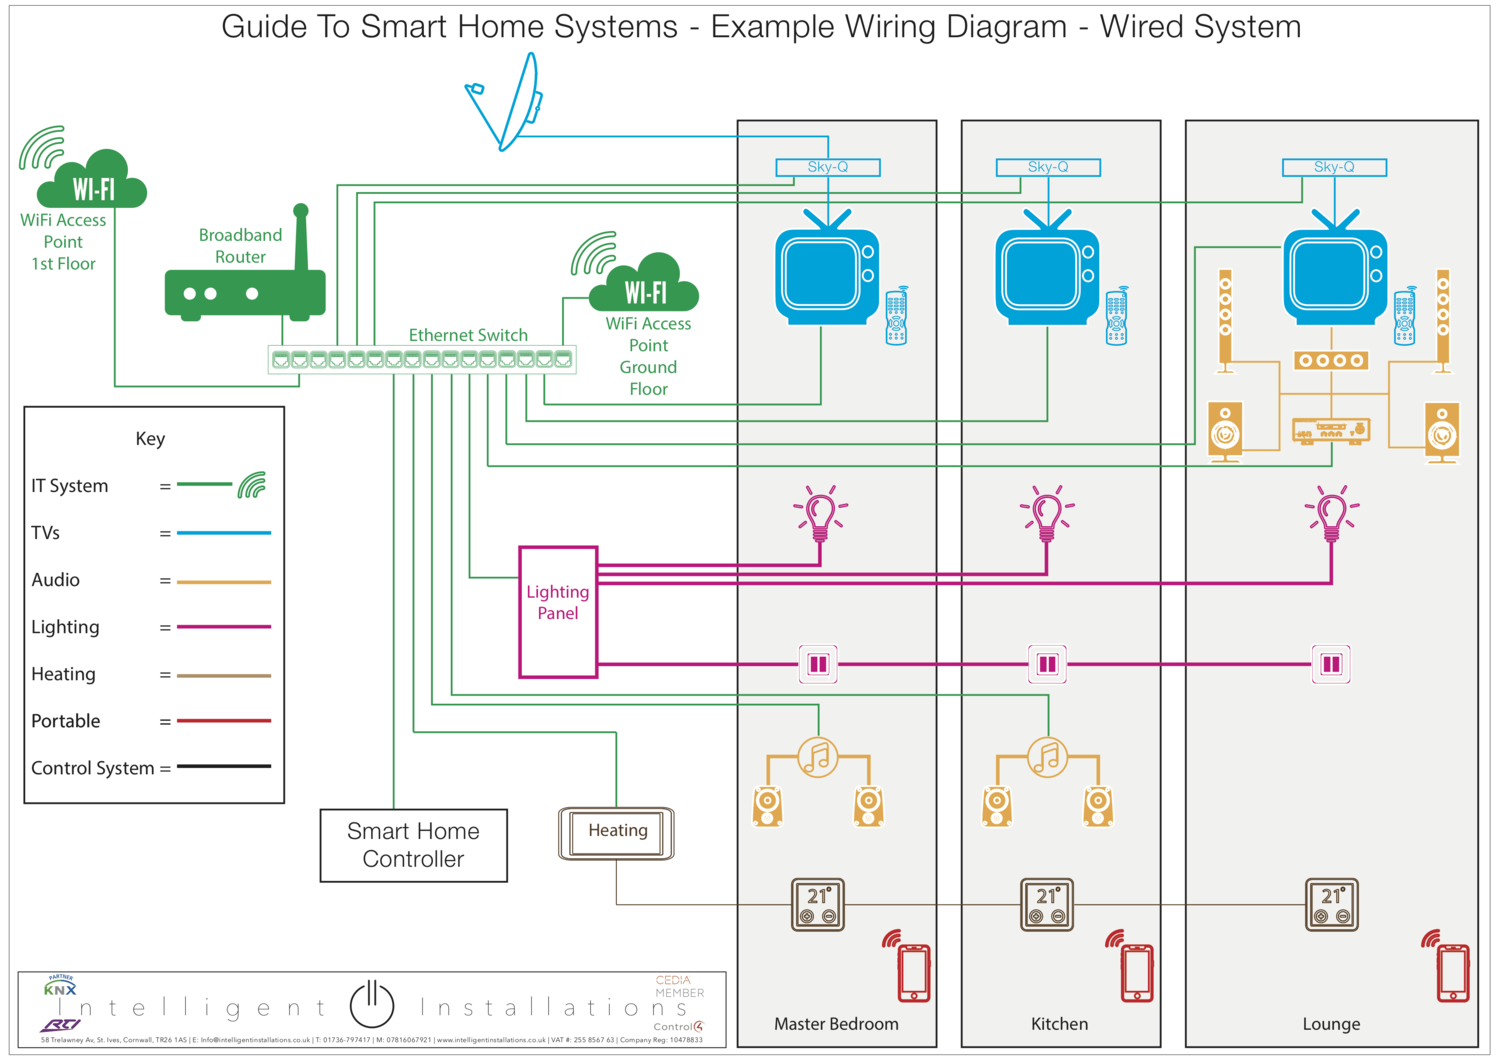 Guide To Smart Homes Part 4, Control 4 Lighting Wiring Diagram